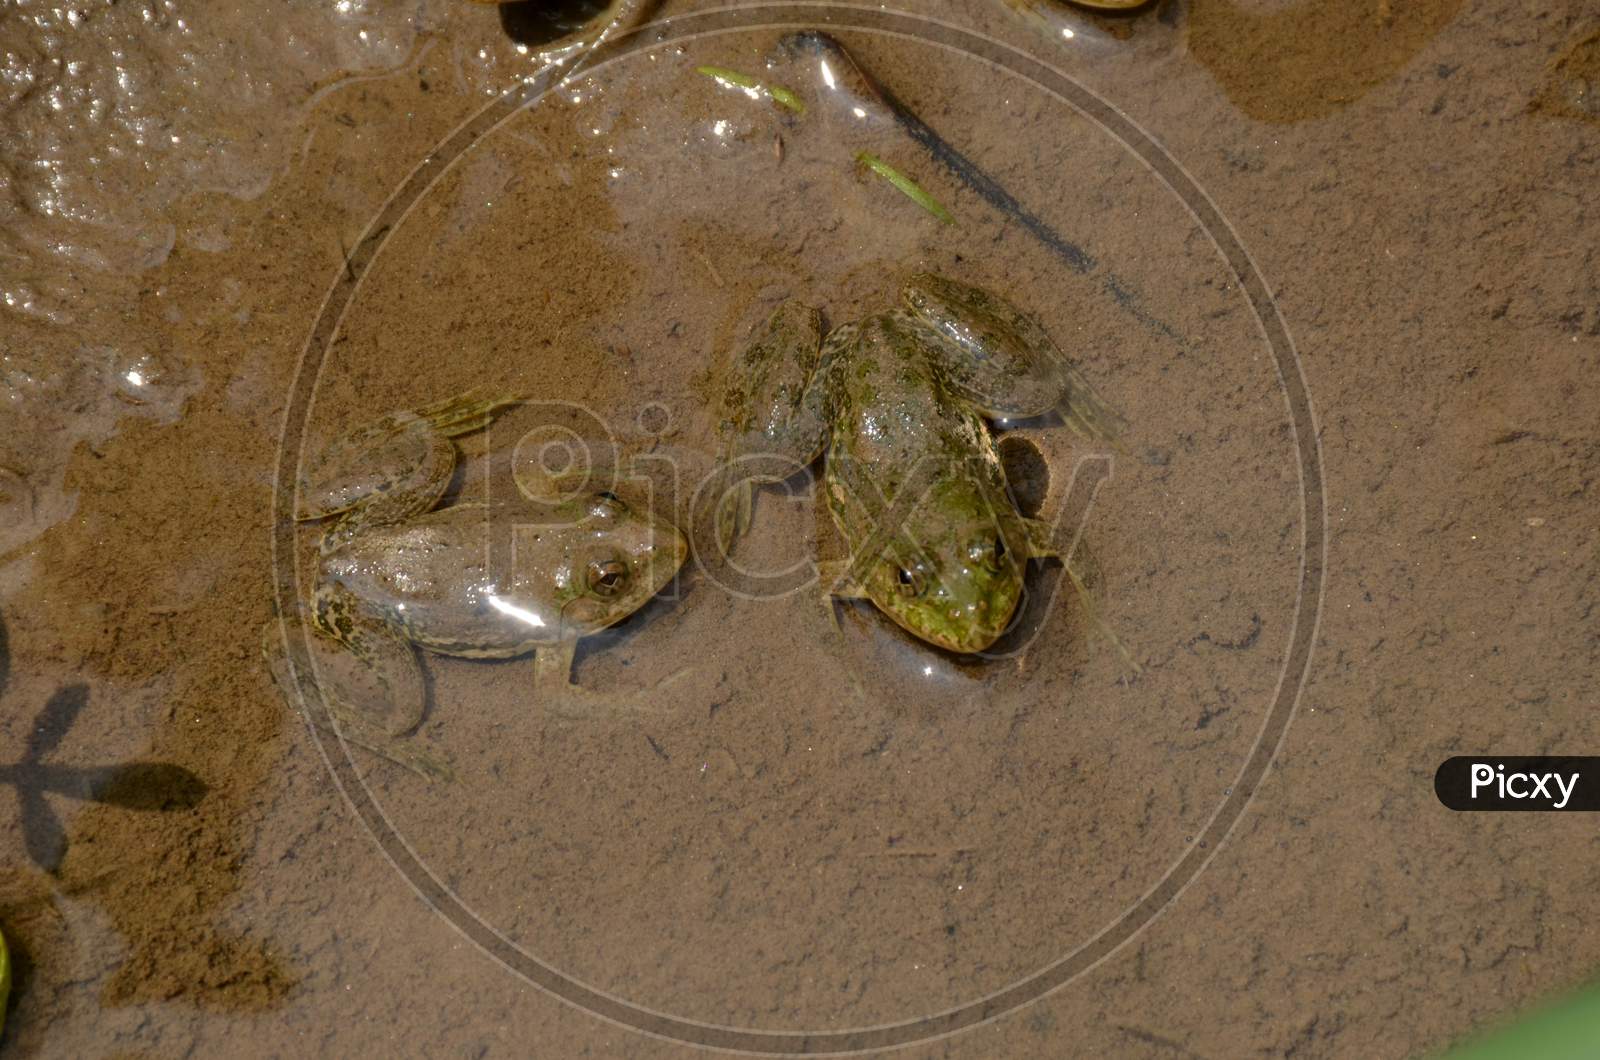 The Pair Of Small Brown Frog Melt With Clay In The Water.